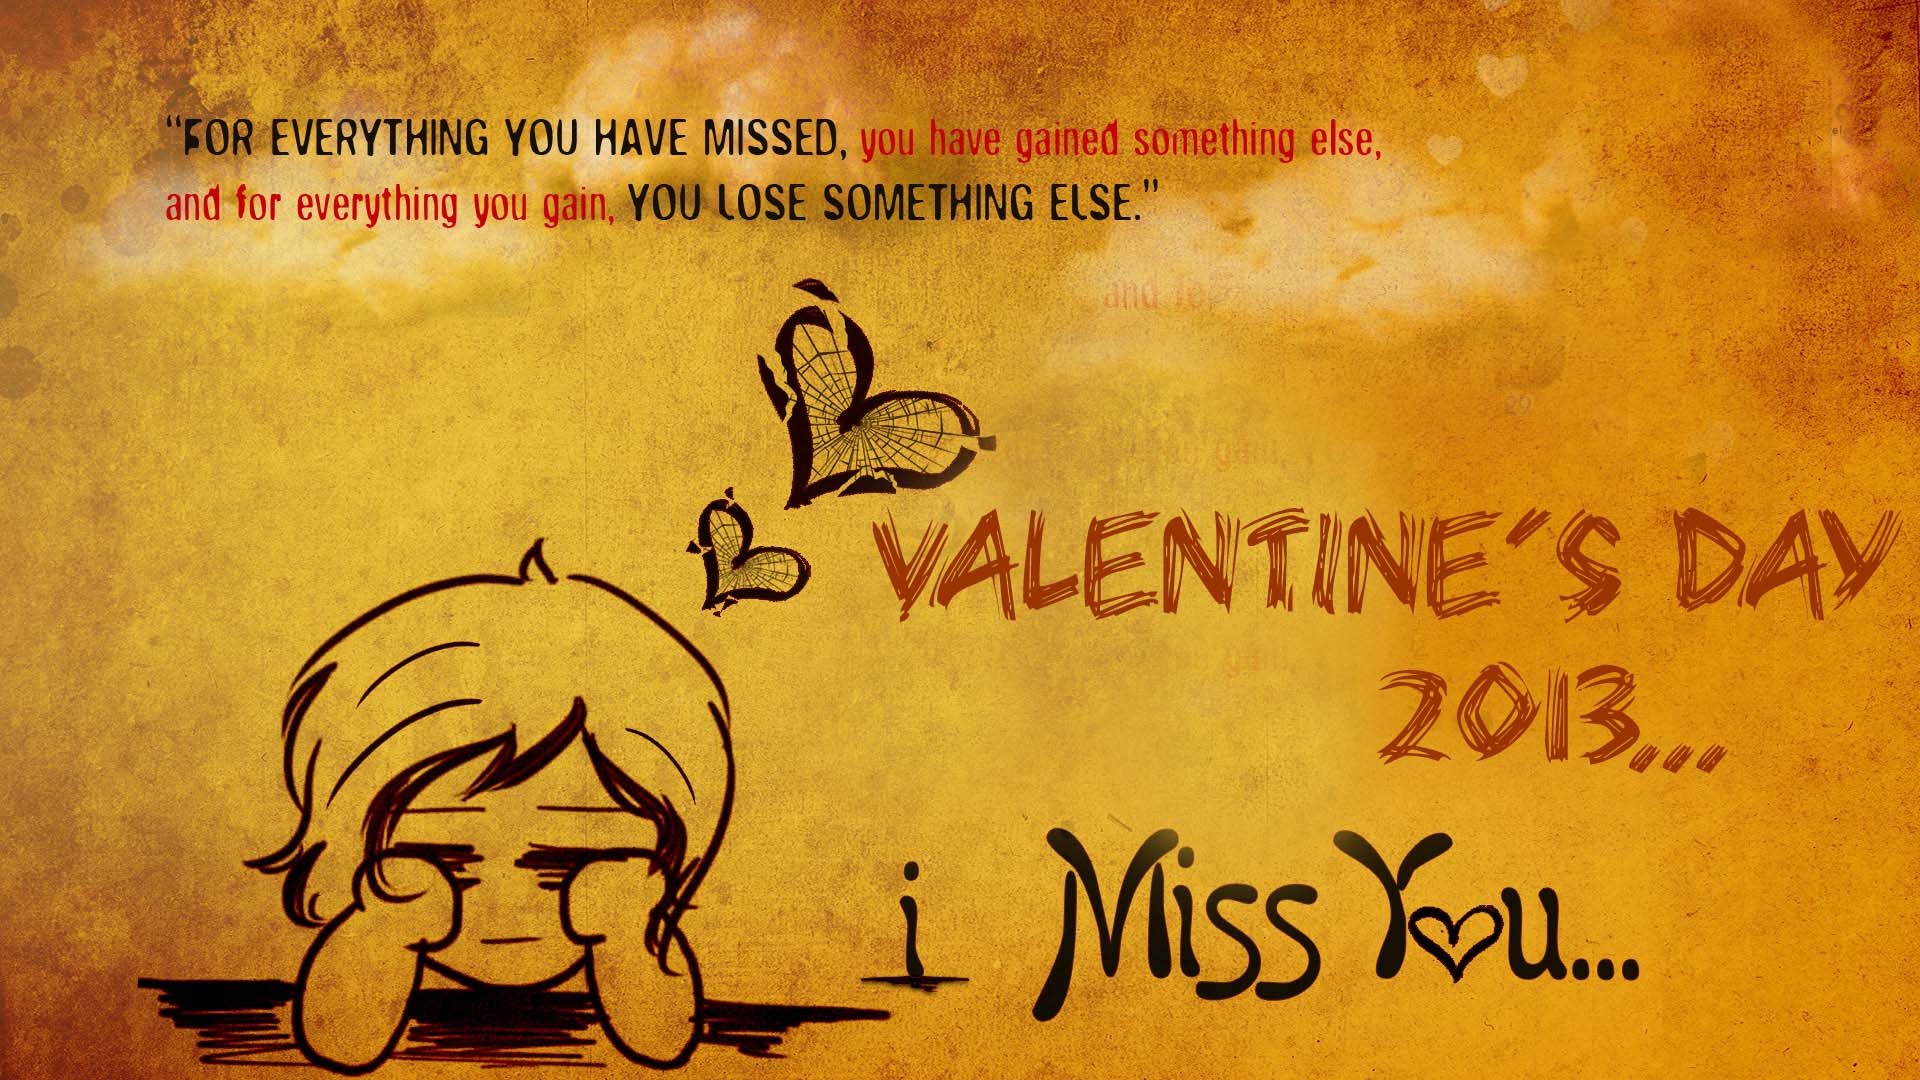 1920x1080 Valentines Day Wallpapers Free Download | Happy Valentines Day .